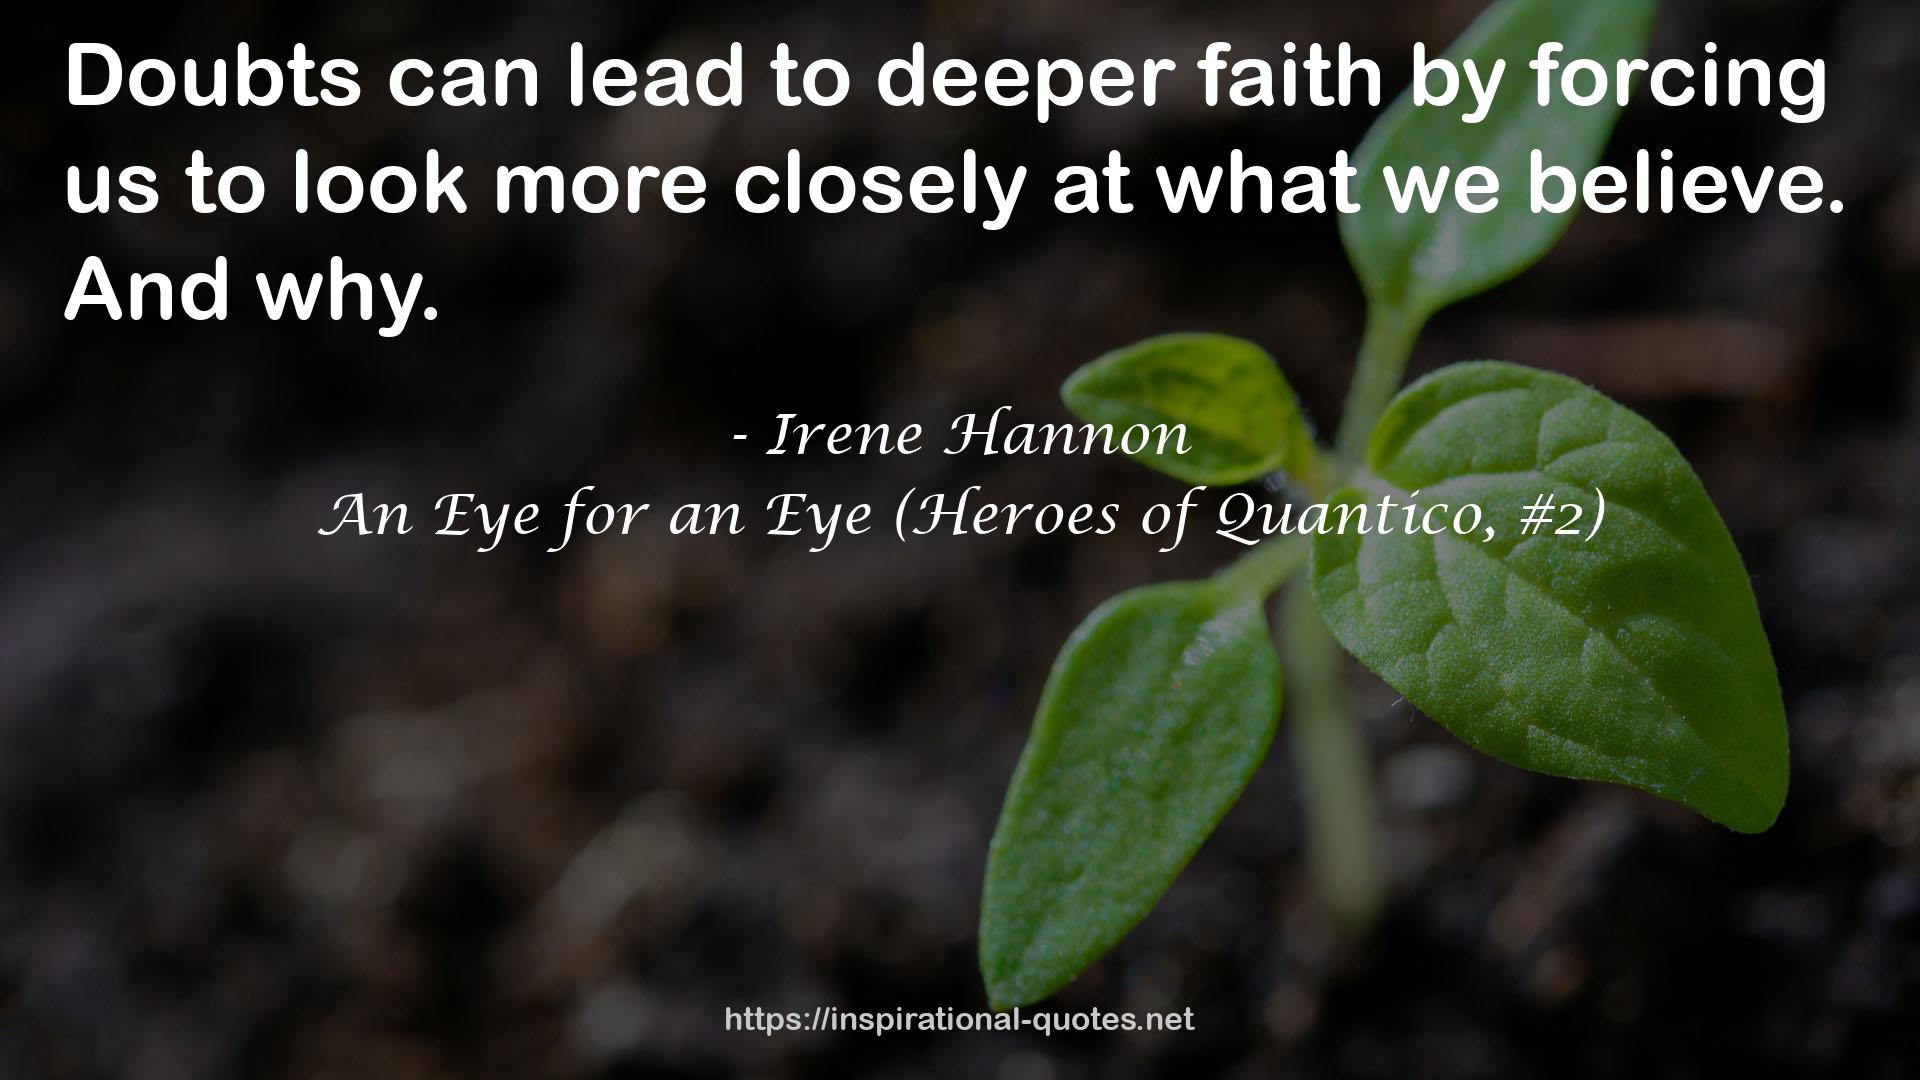 An Eye for an Eye (Heroes of Quantico, #2) QUOTES